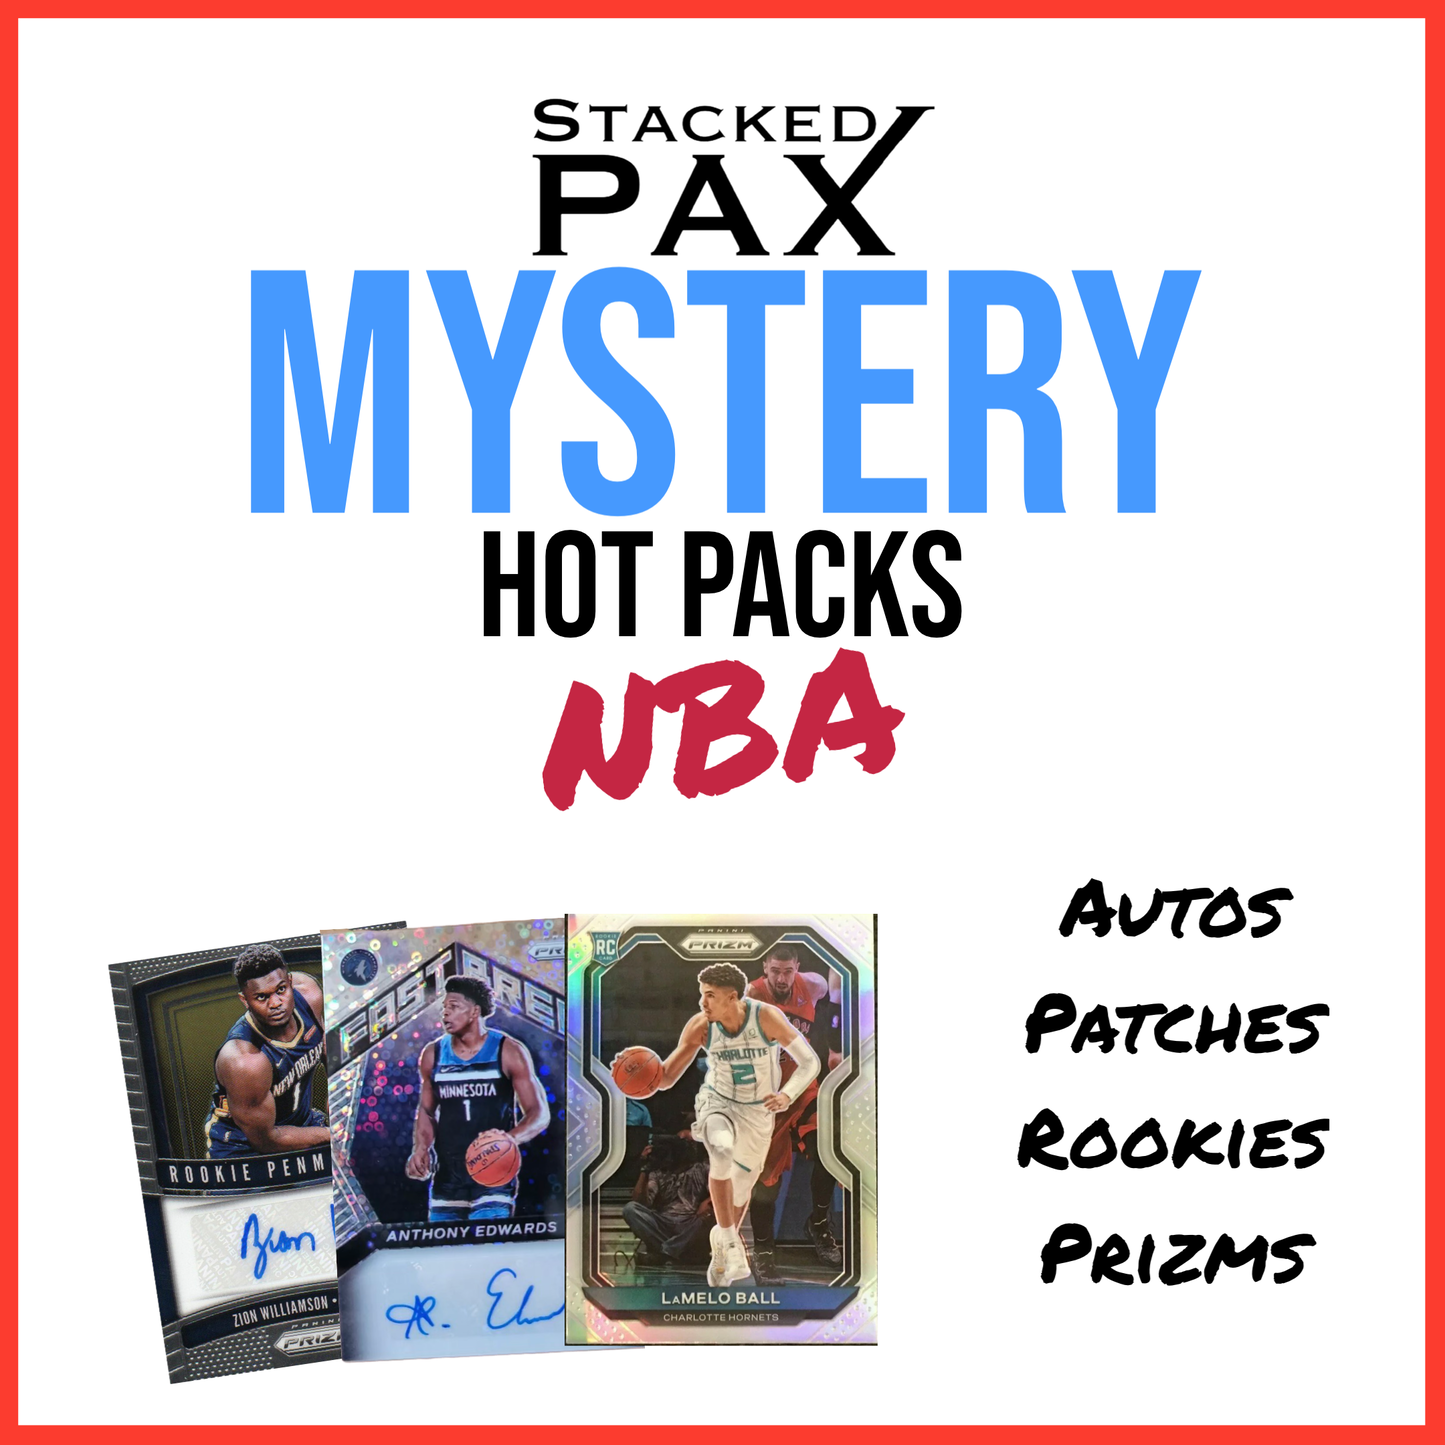 STACKED PAX - NBA BASKETBALL MYSTERY HOT PACK - SERIES 1